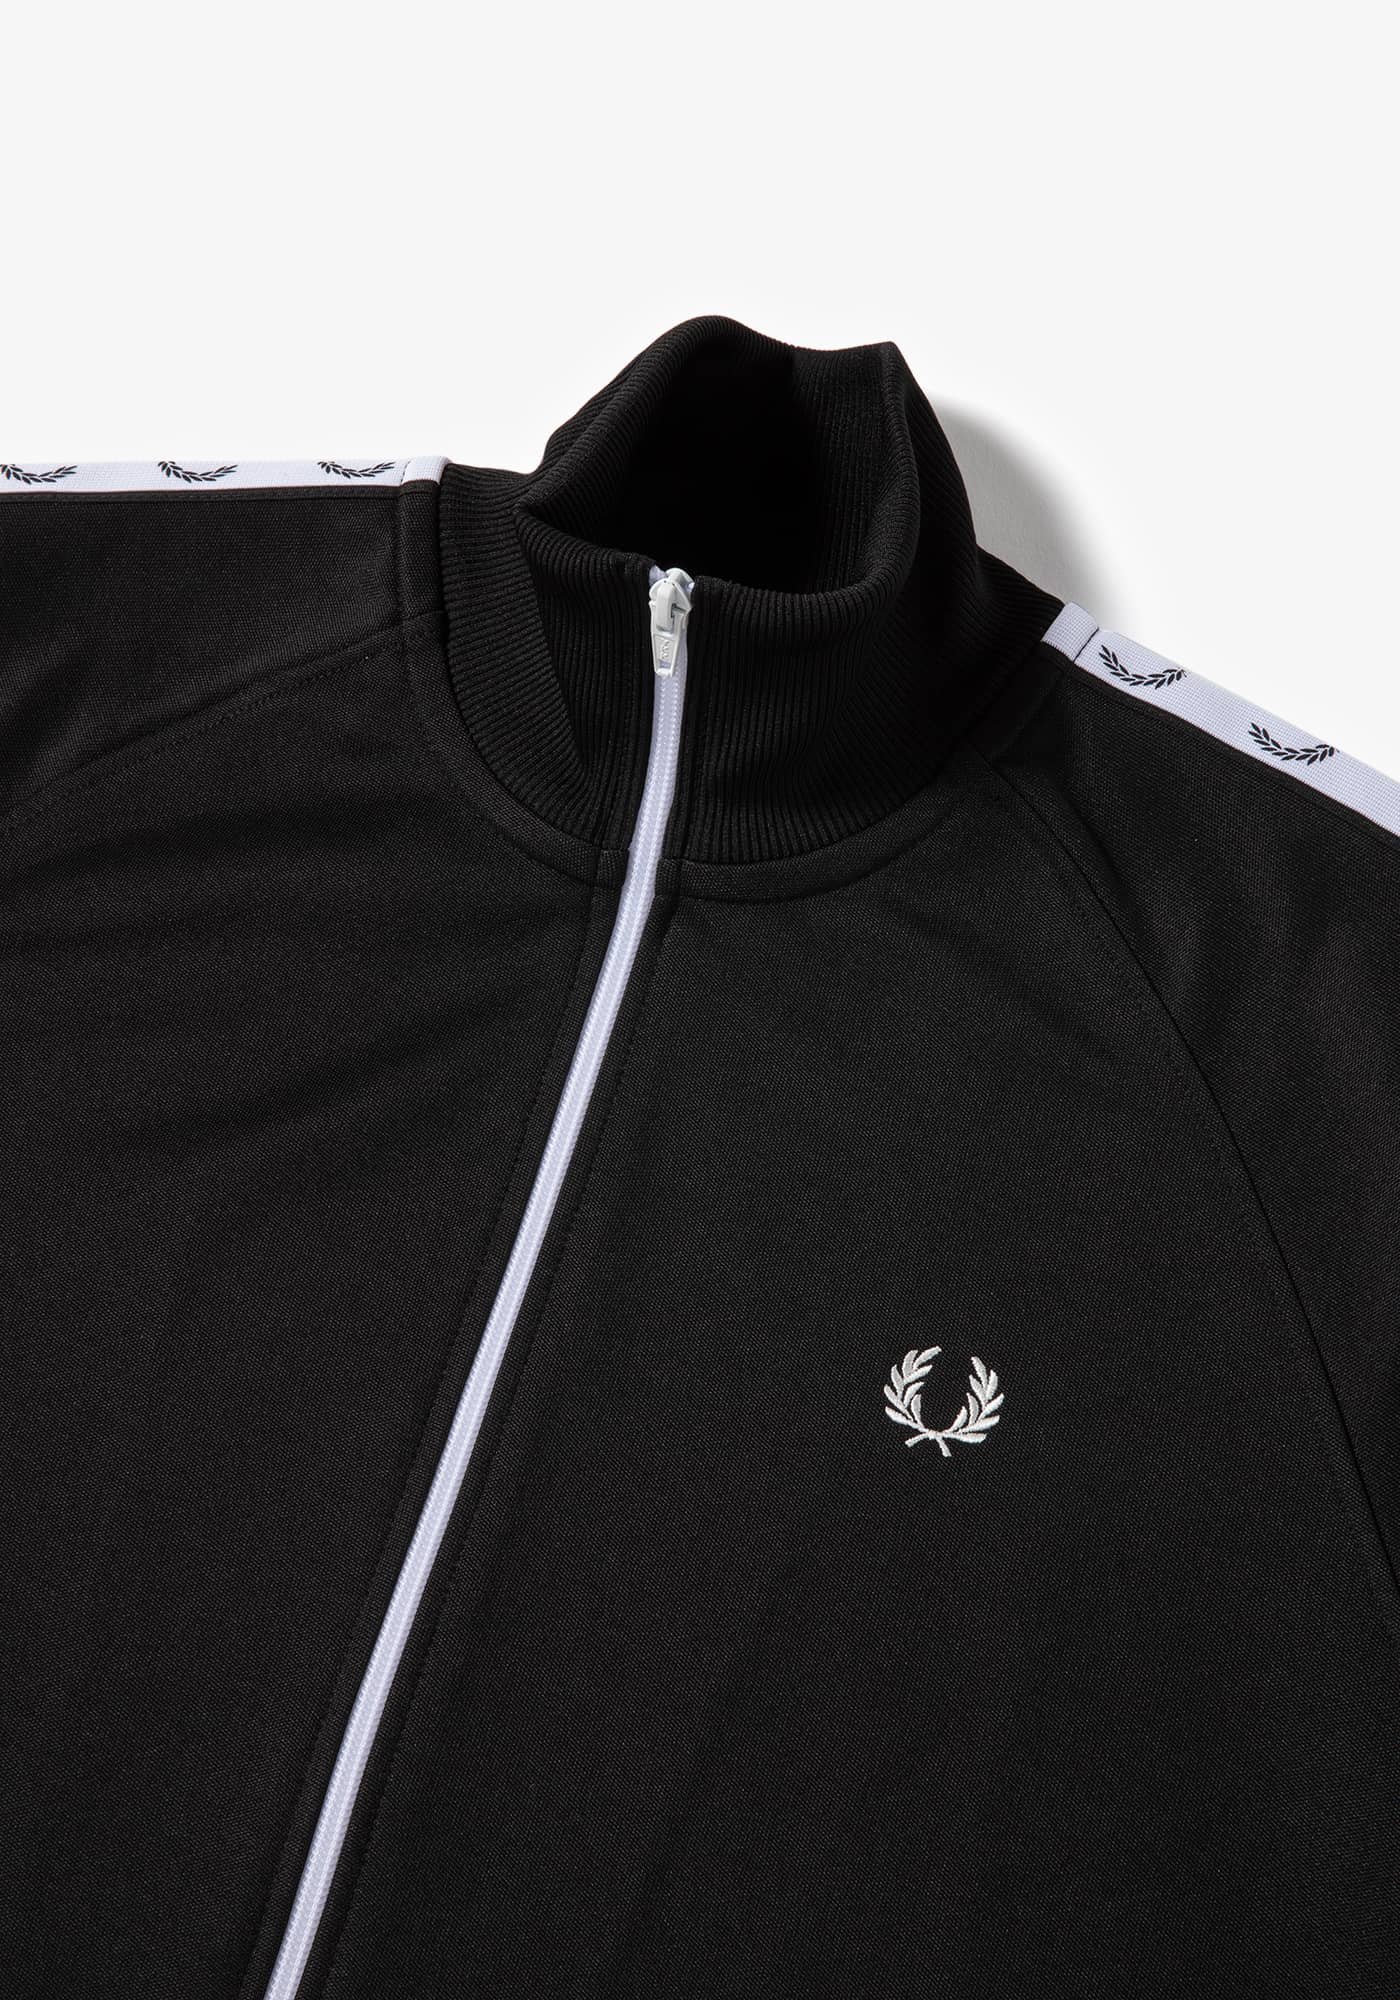 Taped Track Jacket - J4620(S black)｜ FRED PERRY｜渋谷PARCO